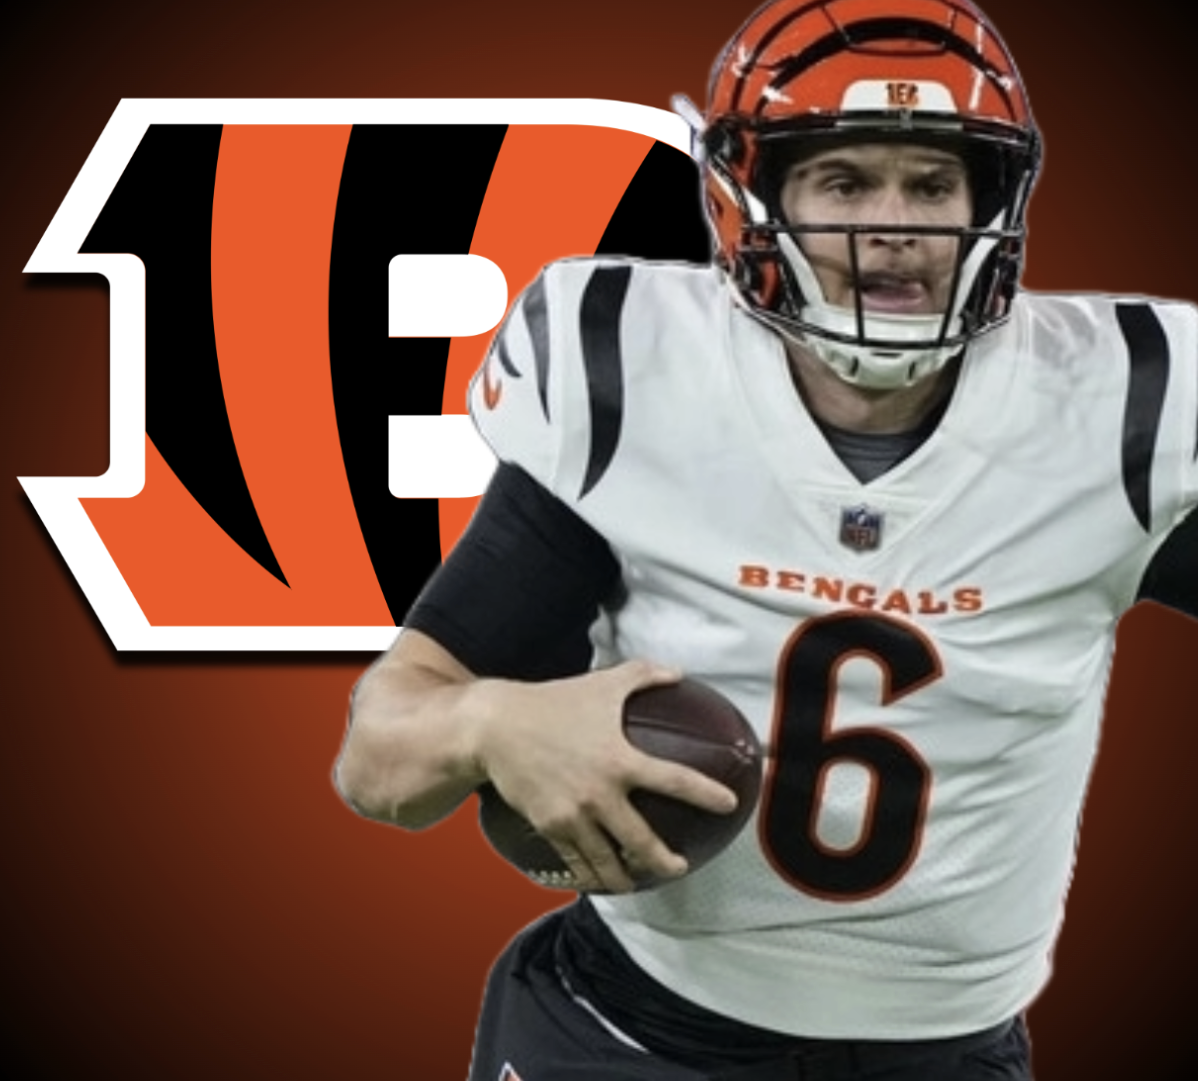 Jake+Browning+in+front+of+the+Bengals+logo.